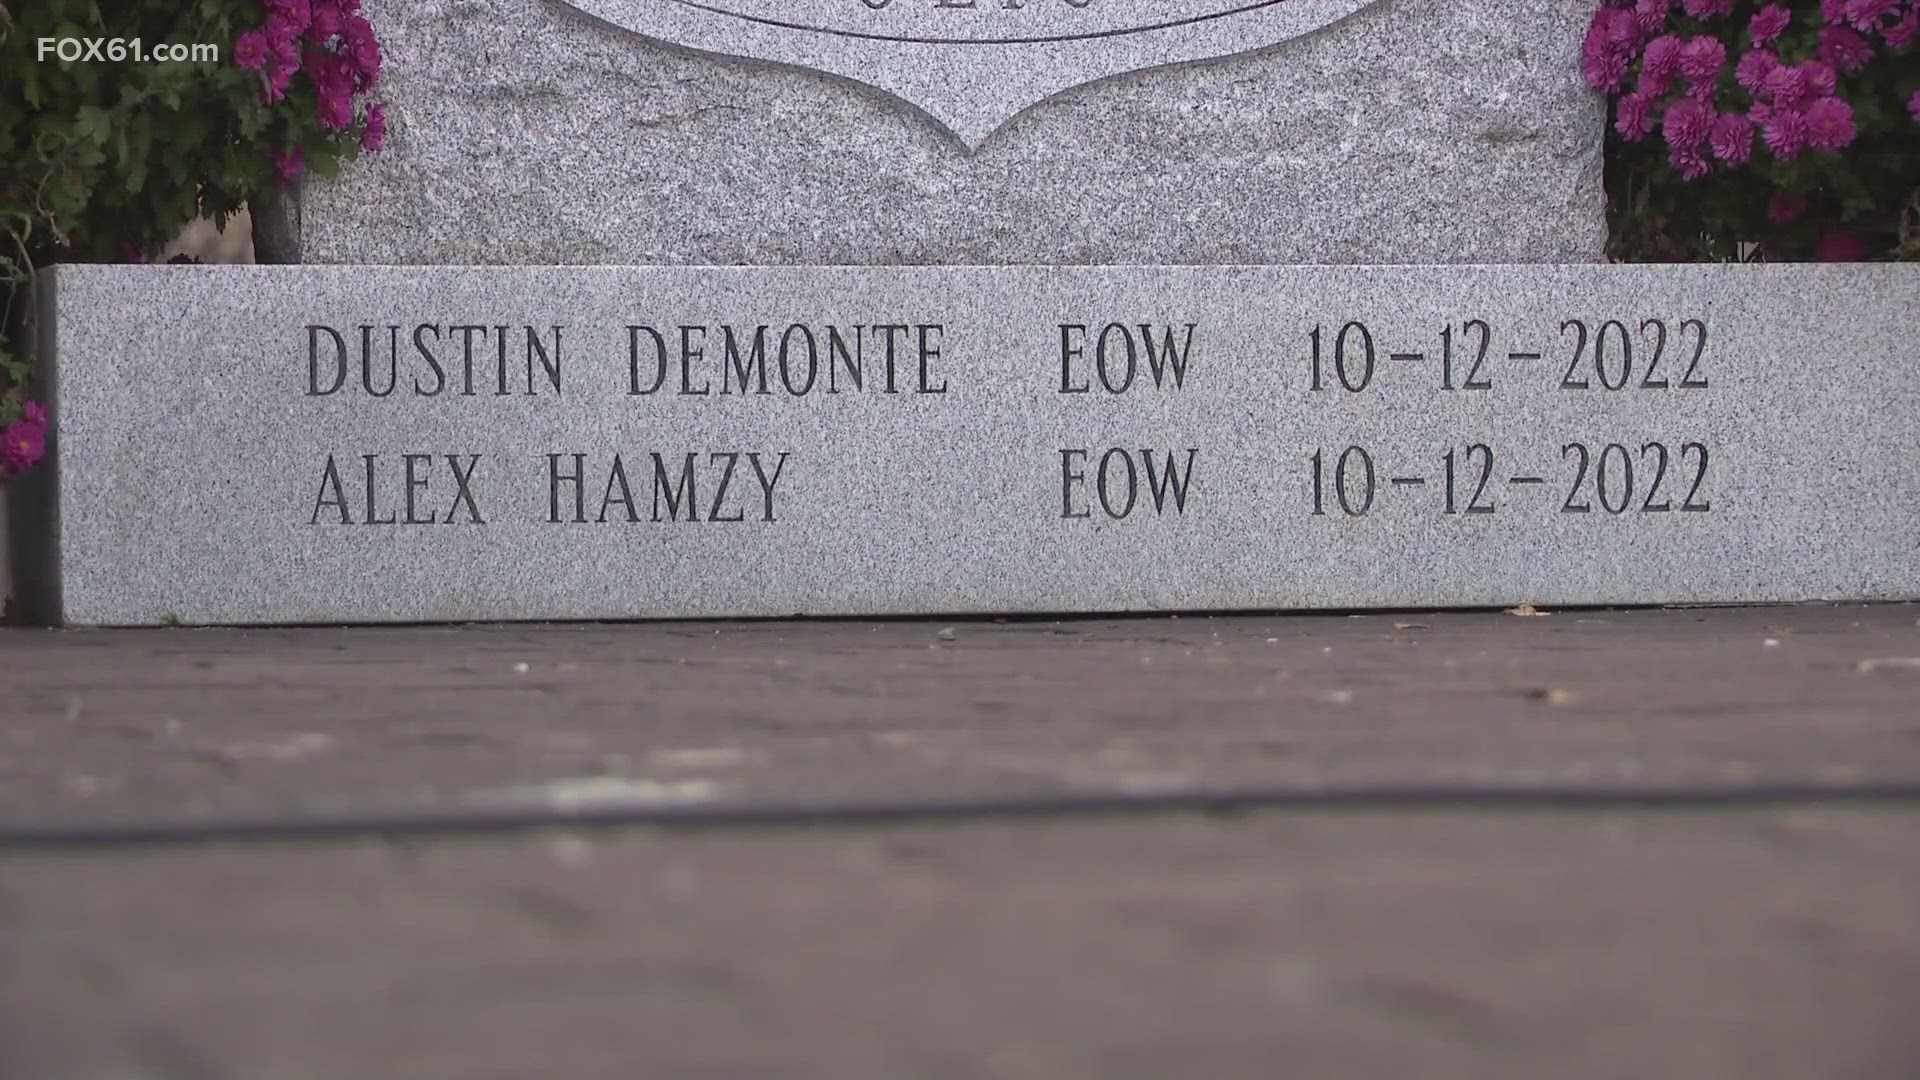 The lives Lt. Dustin DeMonte and Sgt. Alex Hamzy were taken while in the line of duty on October 12, 2022.